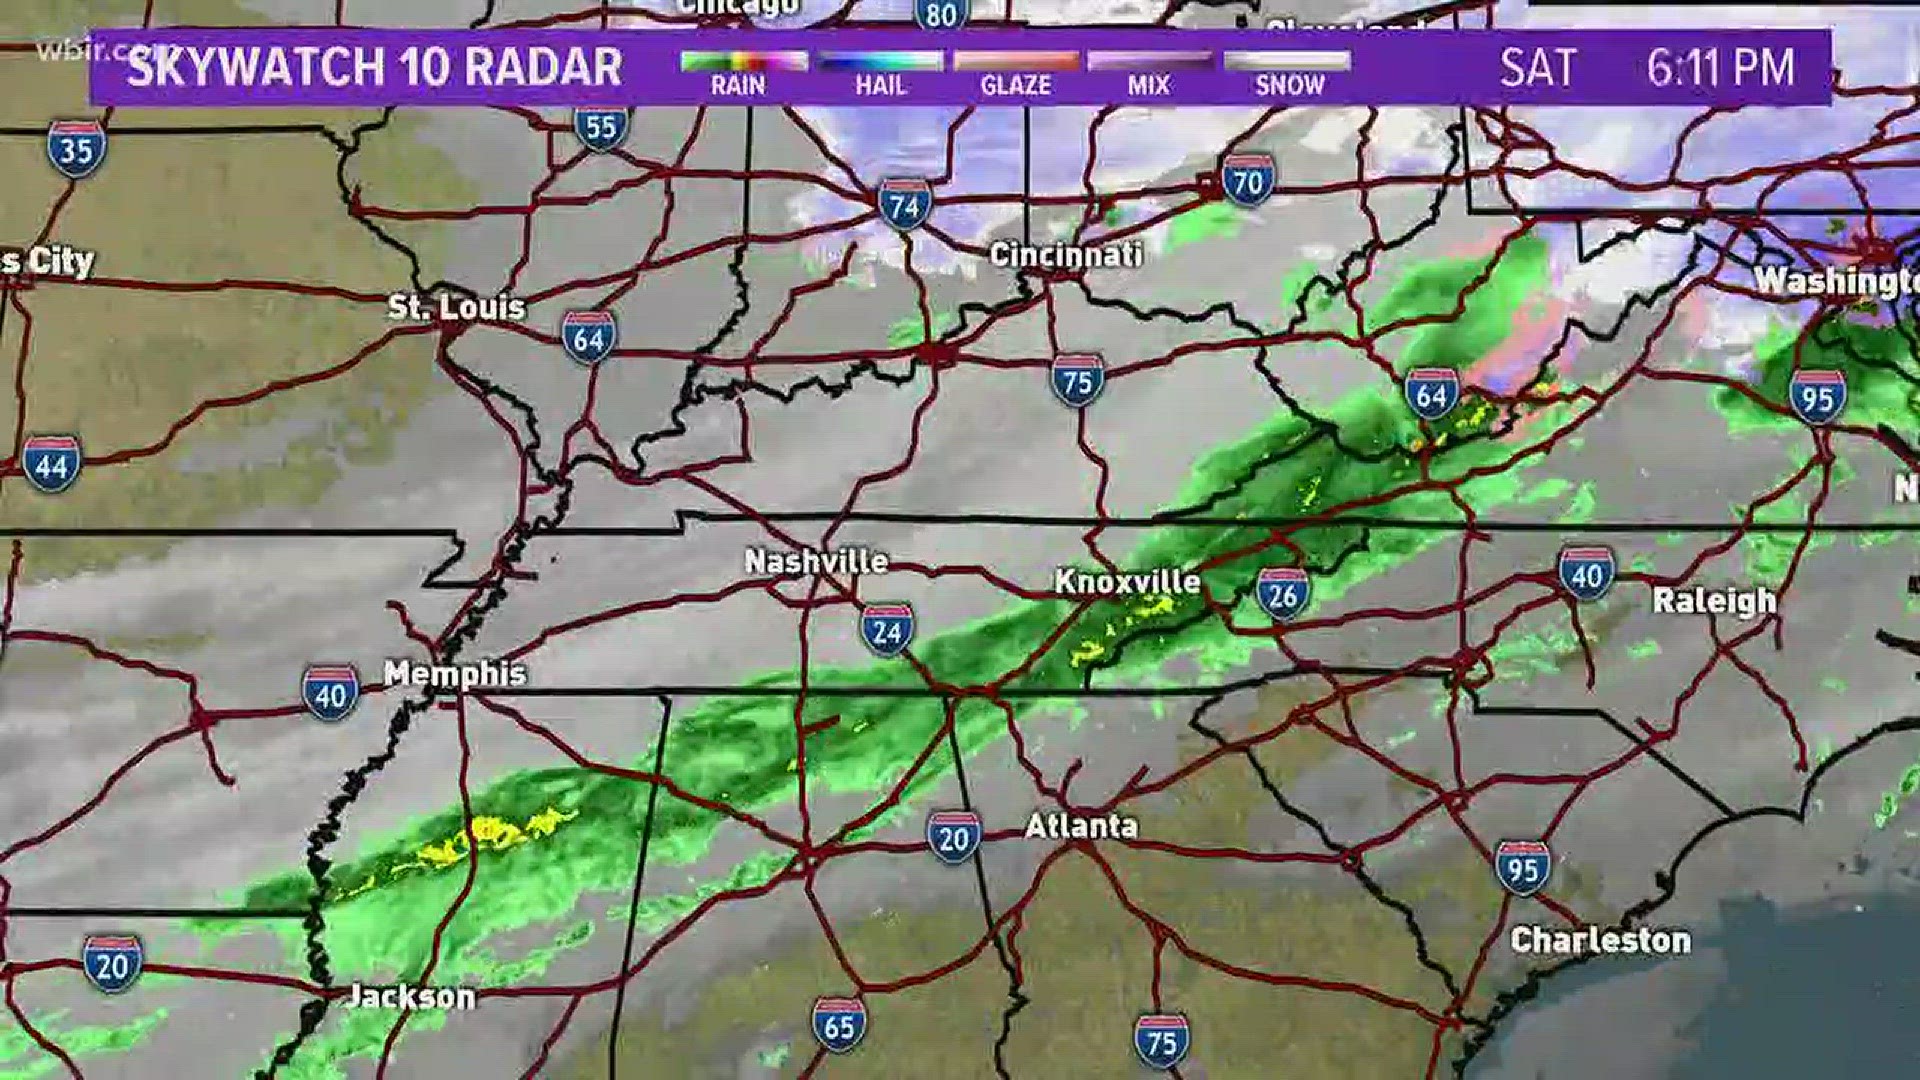 Rain will begin moving out of East Tennessee overnight Saturday.